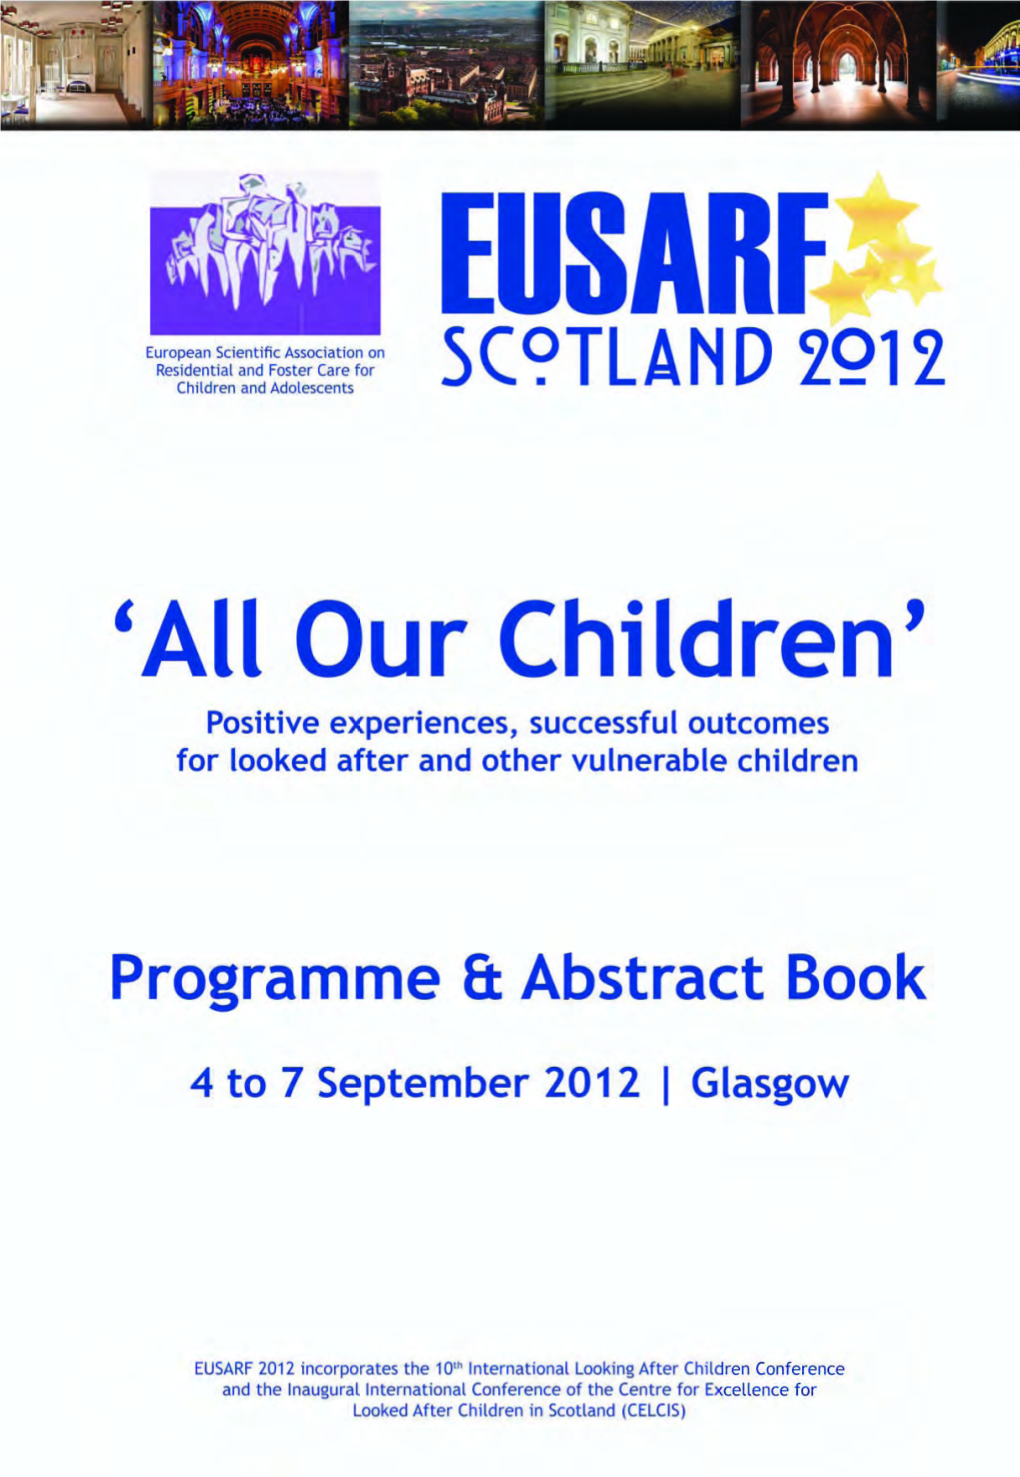 EUSARF 2012 Programme and Abstract Booklet